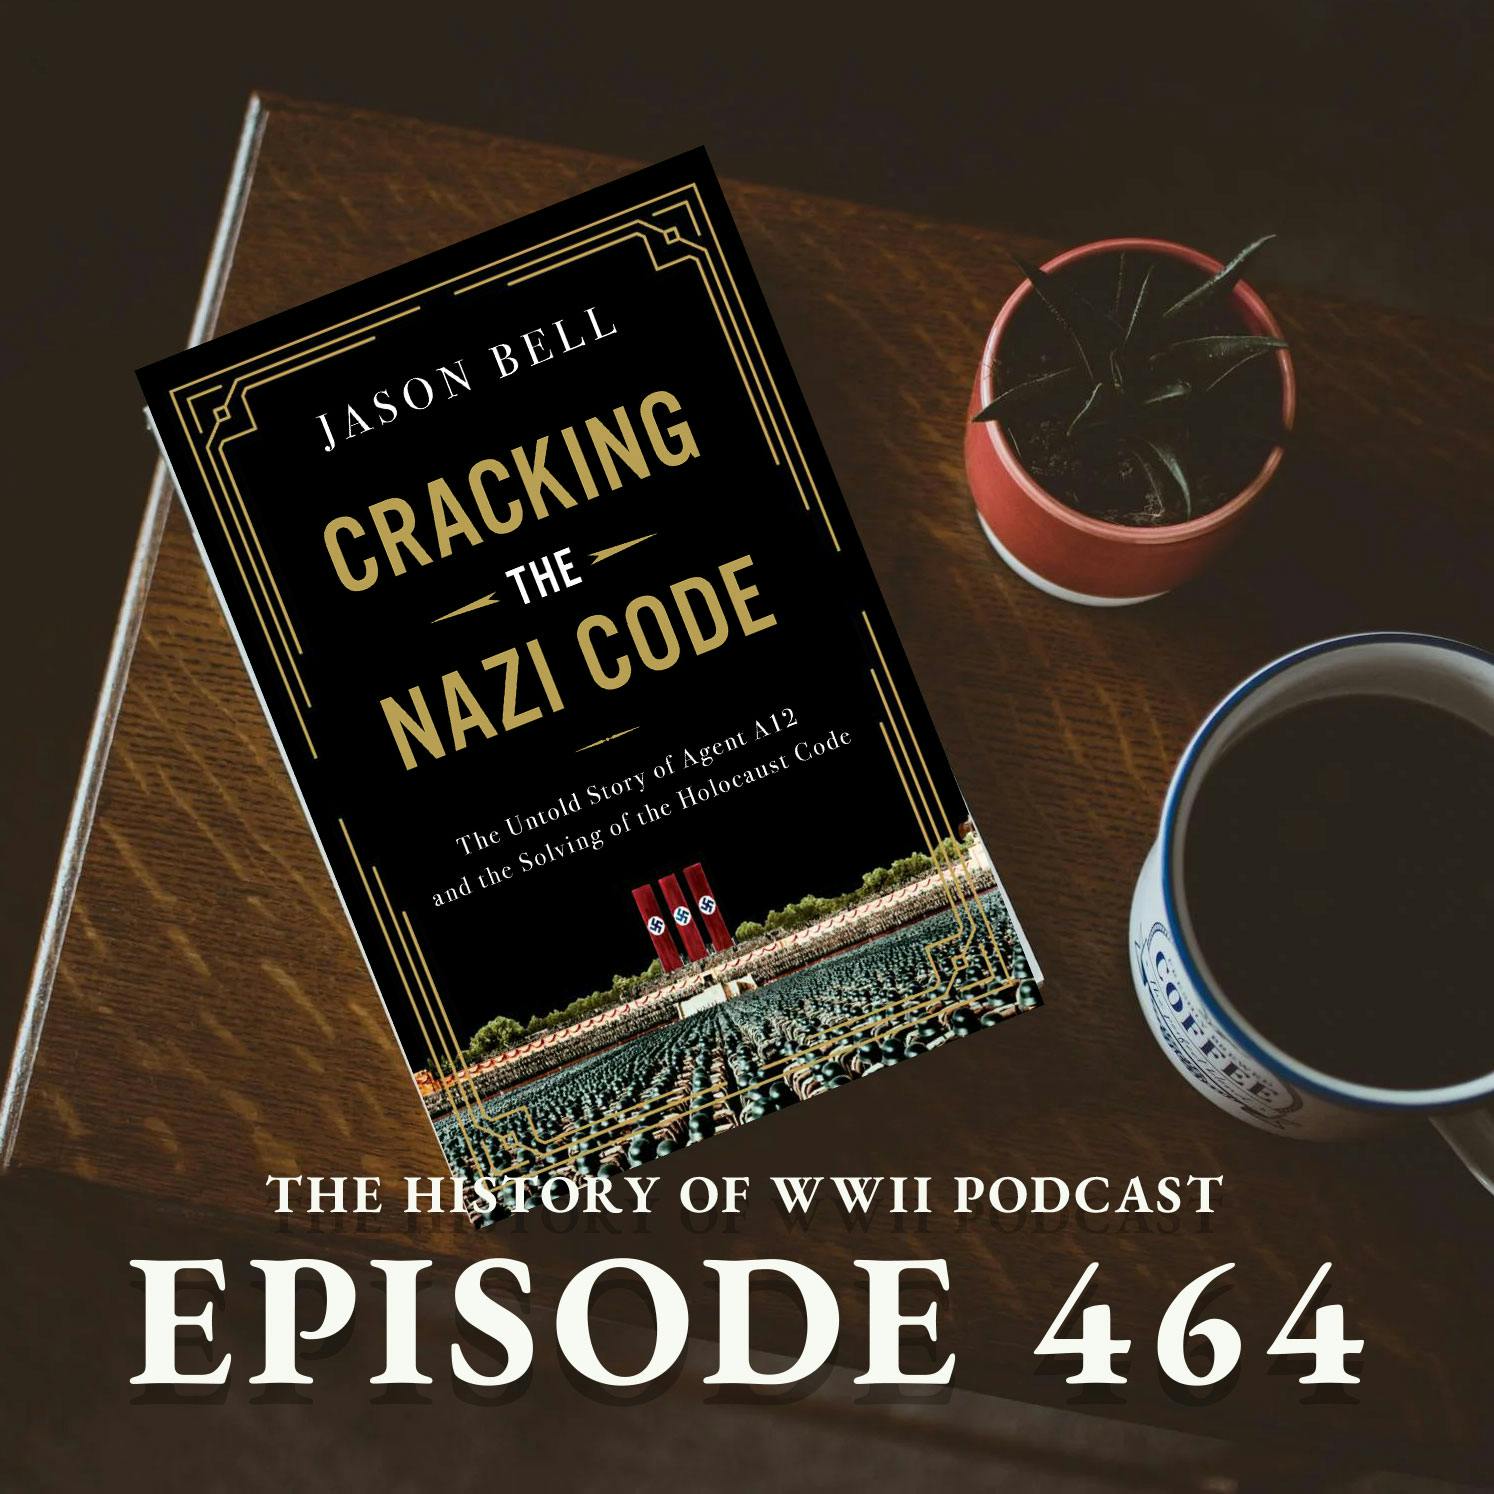 Episode 464: 2 Ep Special! Interview with Jason Bell about his book Cracking the Nazi Code. Then, All Hell Breaks Loose